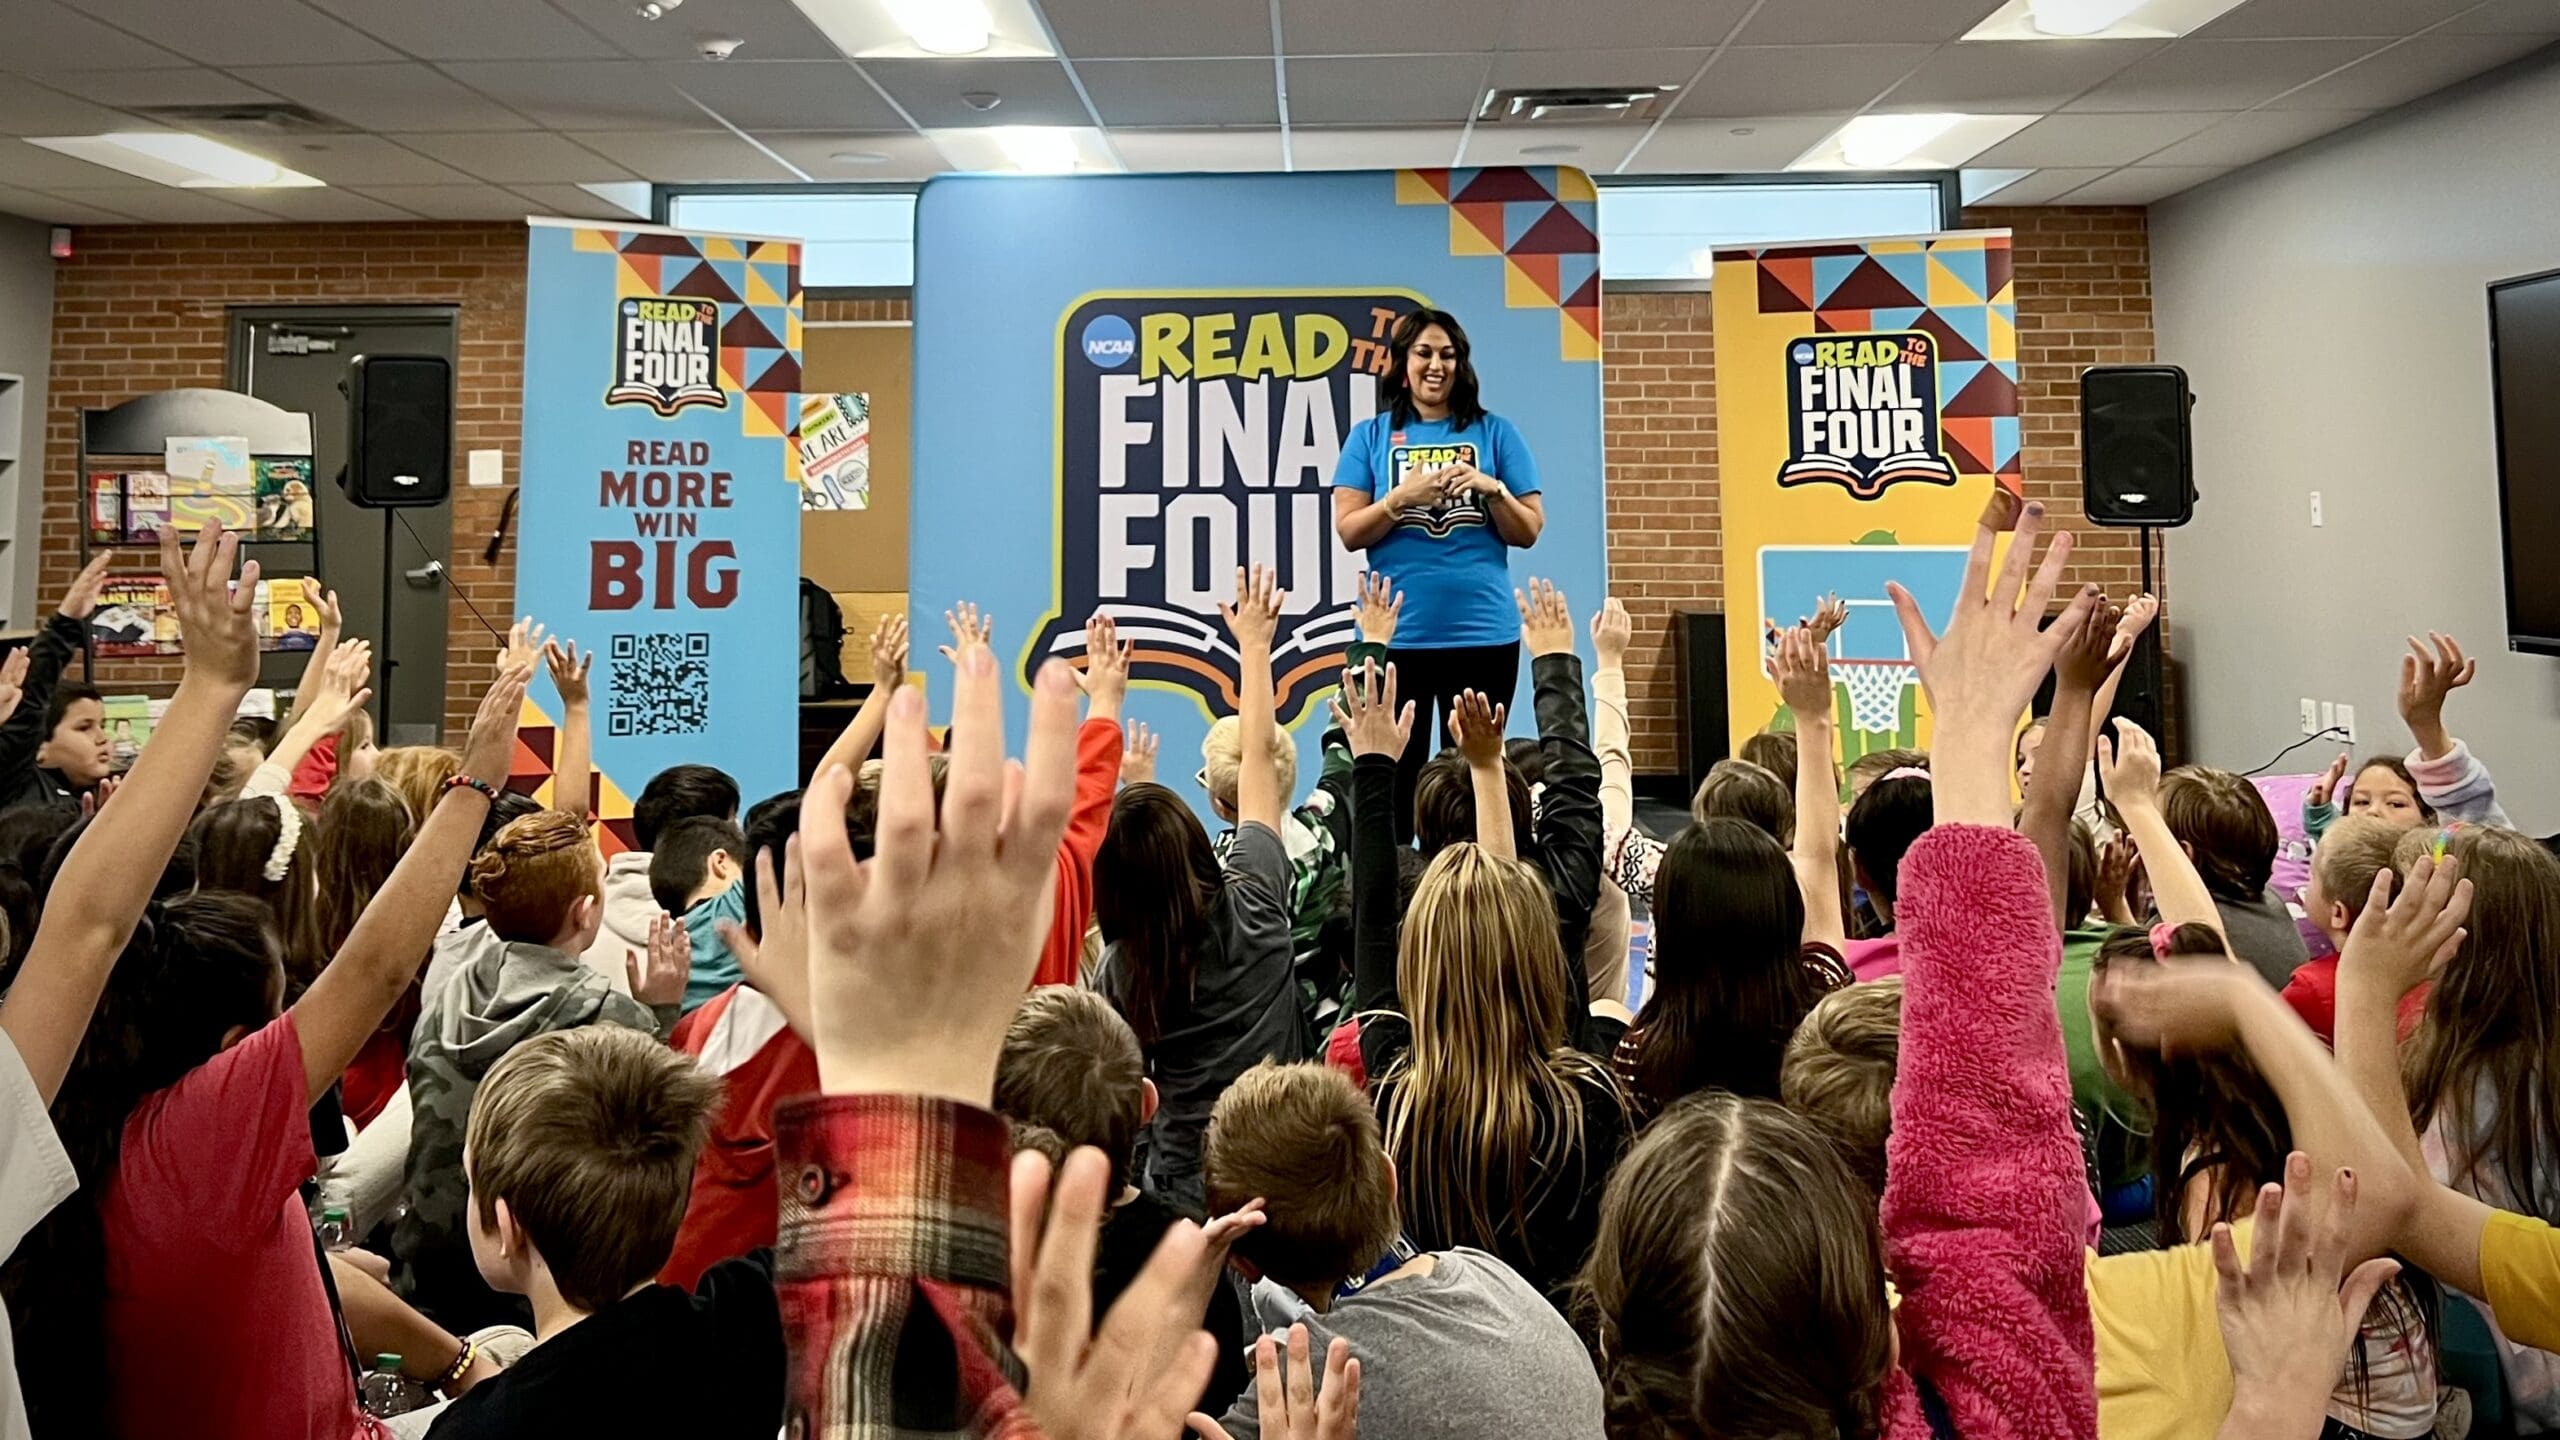 Giving Tuesday: 200 Third Graders Receive Books as Part of Statewide Read to the Final Four Contest